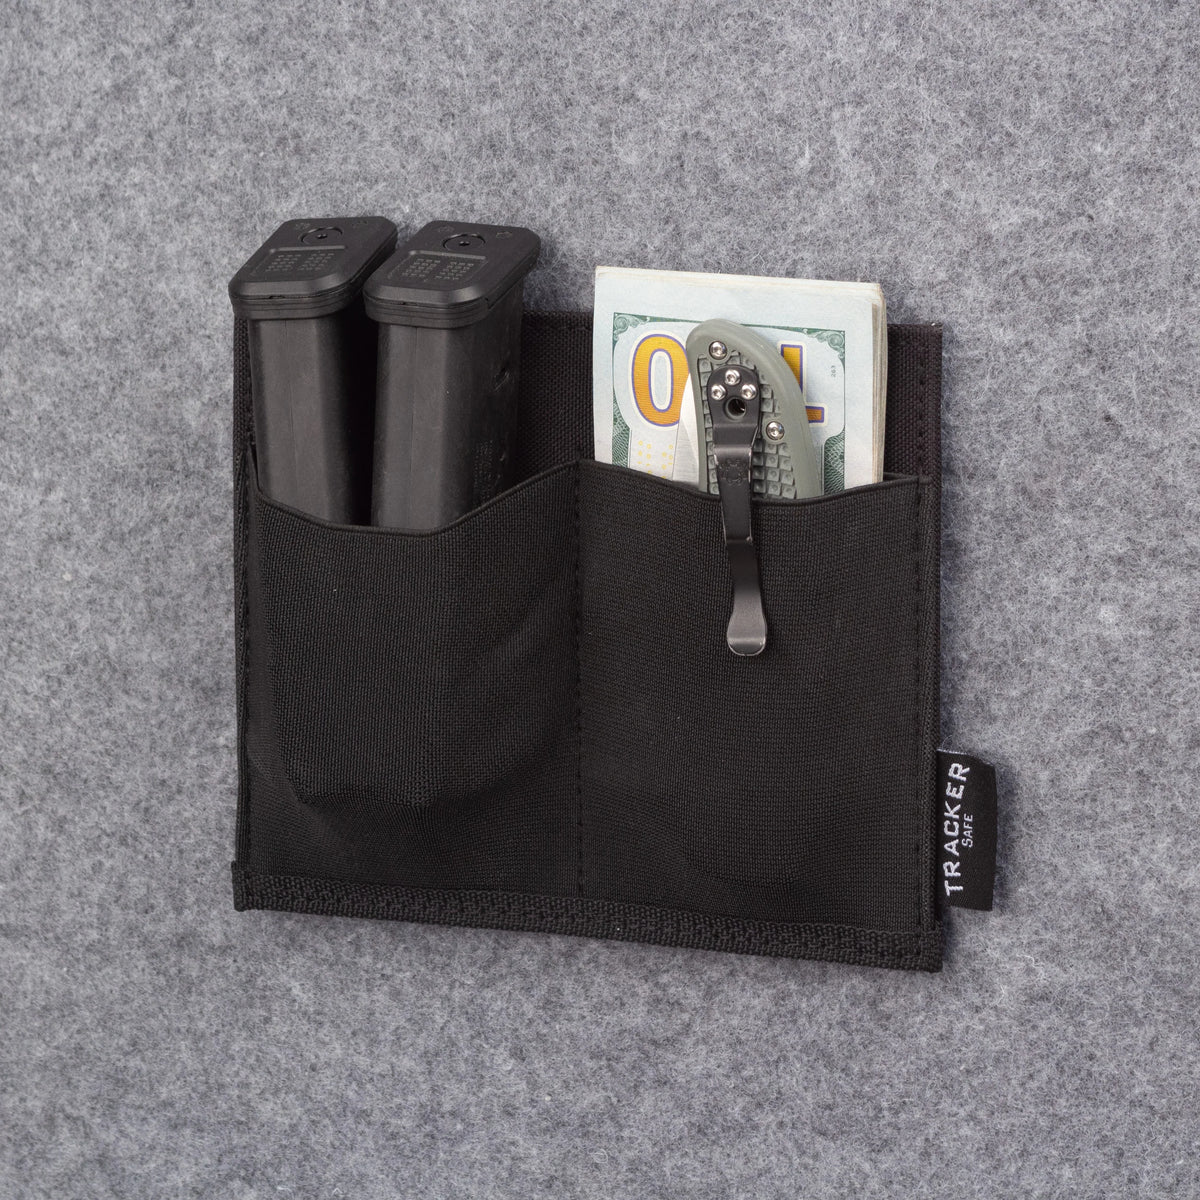 Tracker PE2 Pocket Elastic 2 Mag Holder with Mags and Other Items